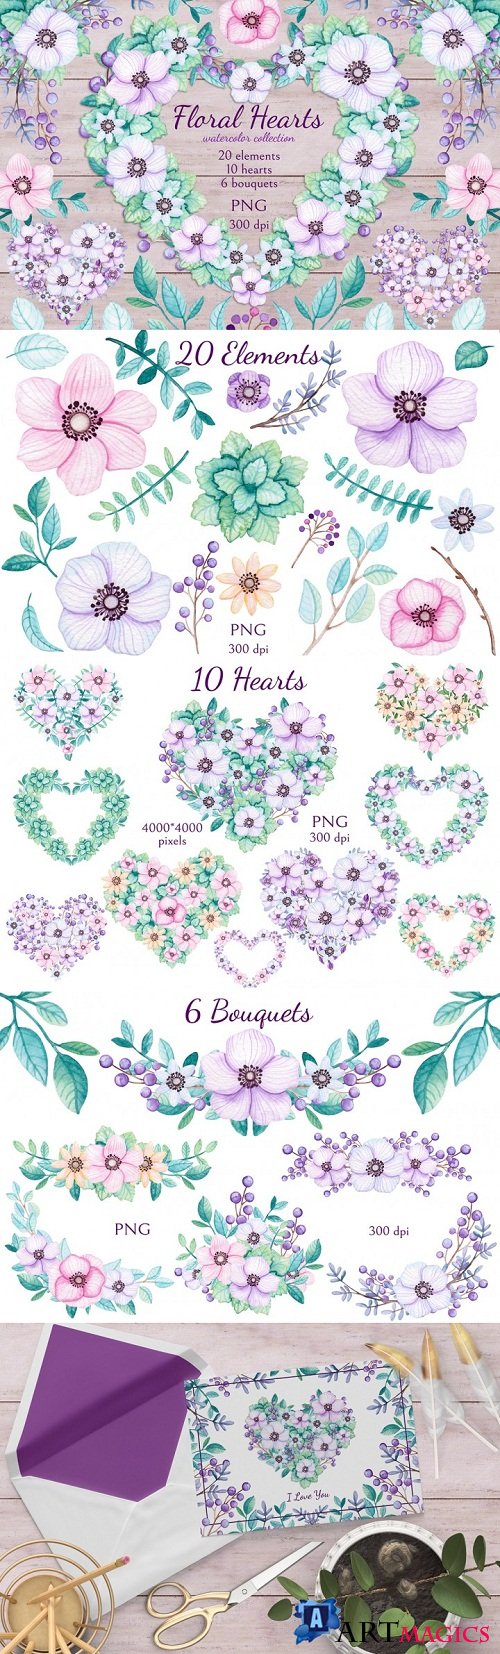 Thehungryjpeg - Floral Hearts 117479